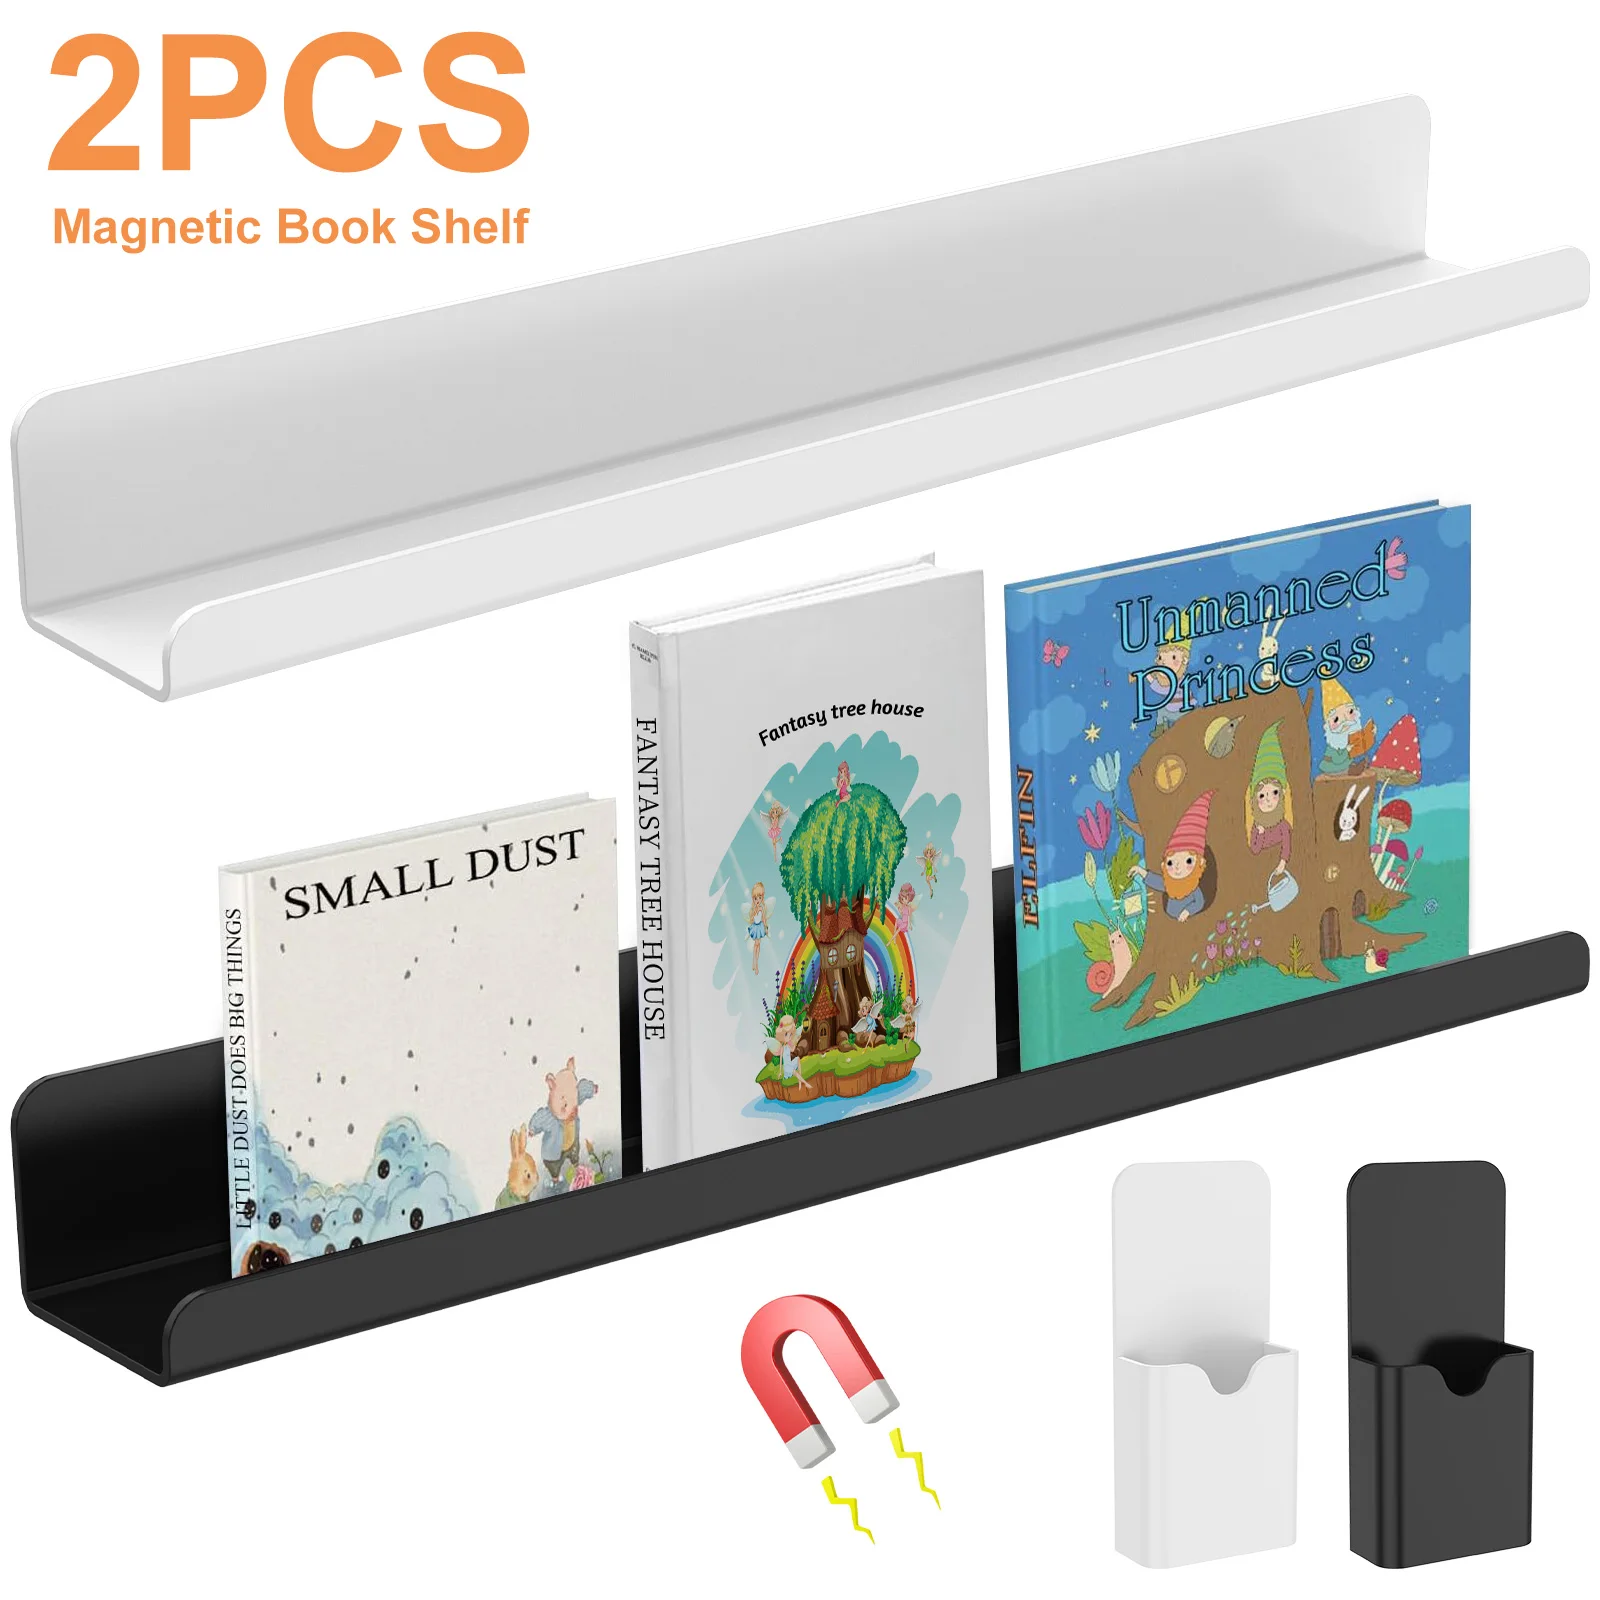 

2Pcs Magnetic Book Shelf Whiteboard Acrylic Magnetic for Book Holder with Pen Container Magnetic Floating Book Display Shelf